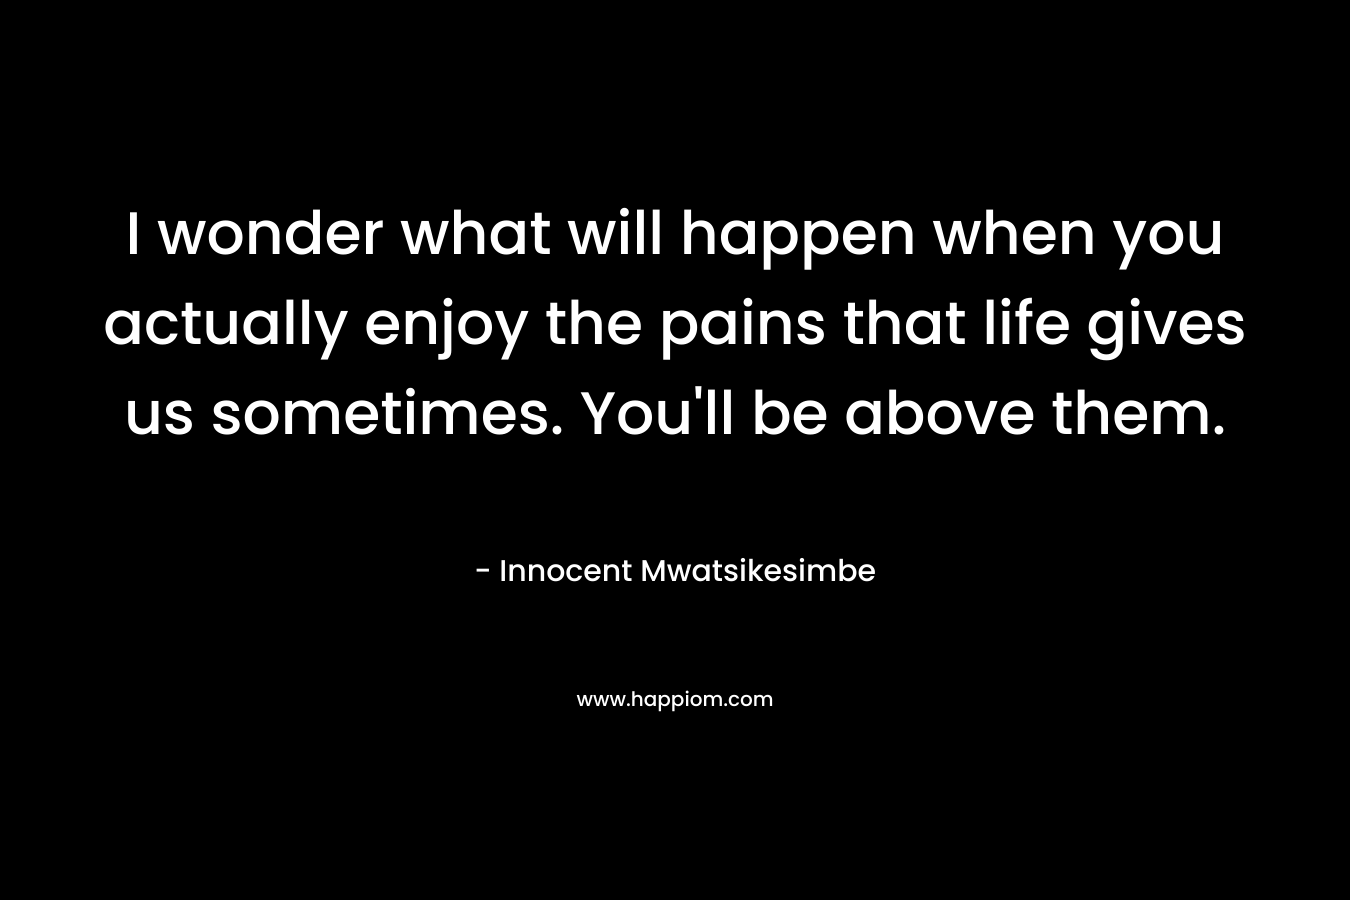 I wonder what will happen when you actually enjoy the pains that life gives us sometimes. You'll be above them.